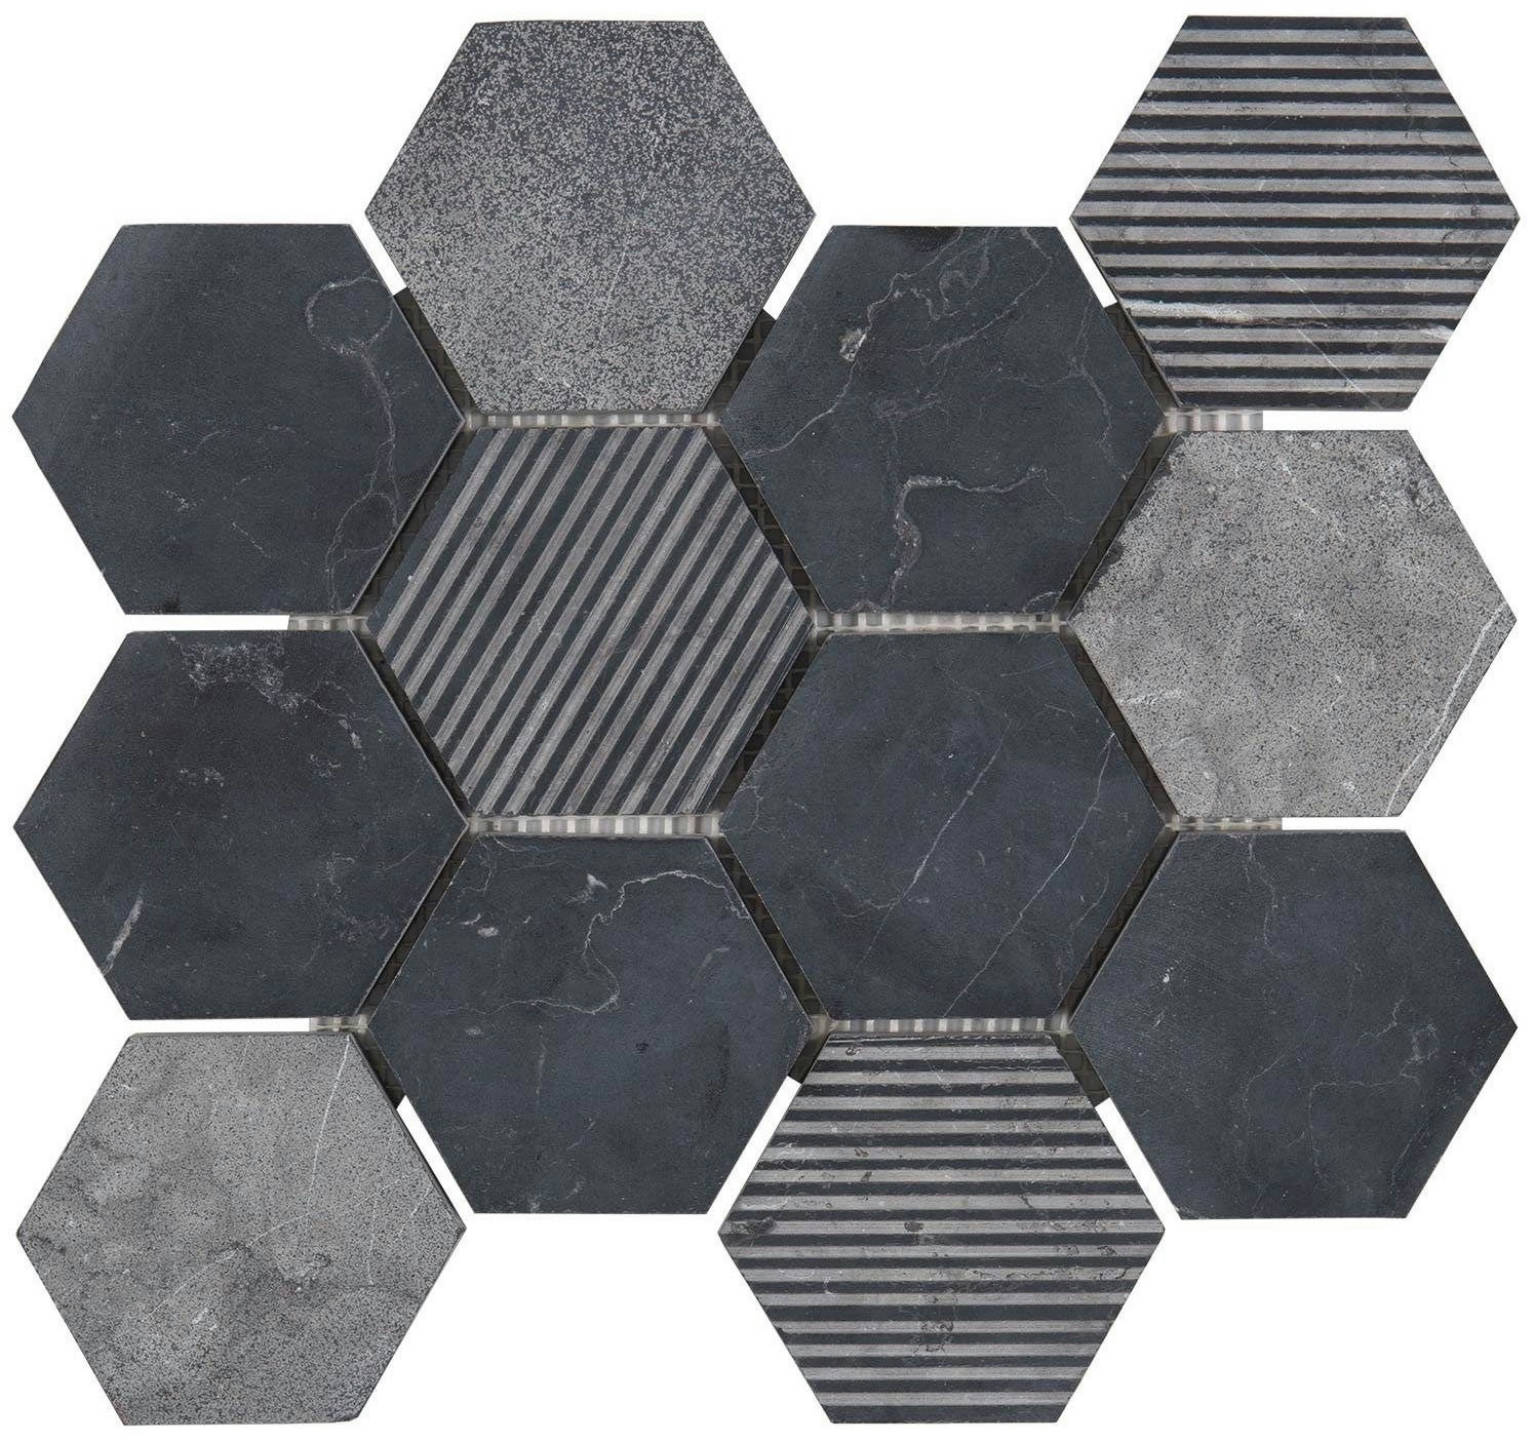 YS1601P | Stones & More | Finest selection of Mosaics, Glass, Tile and Stone